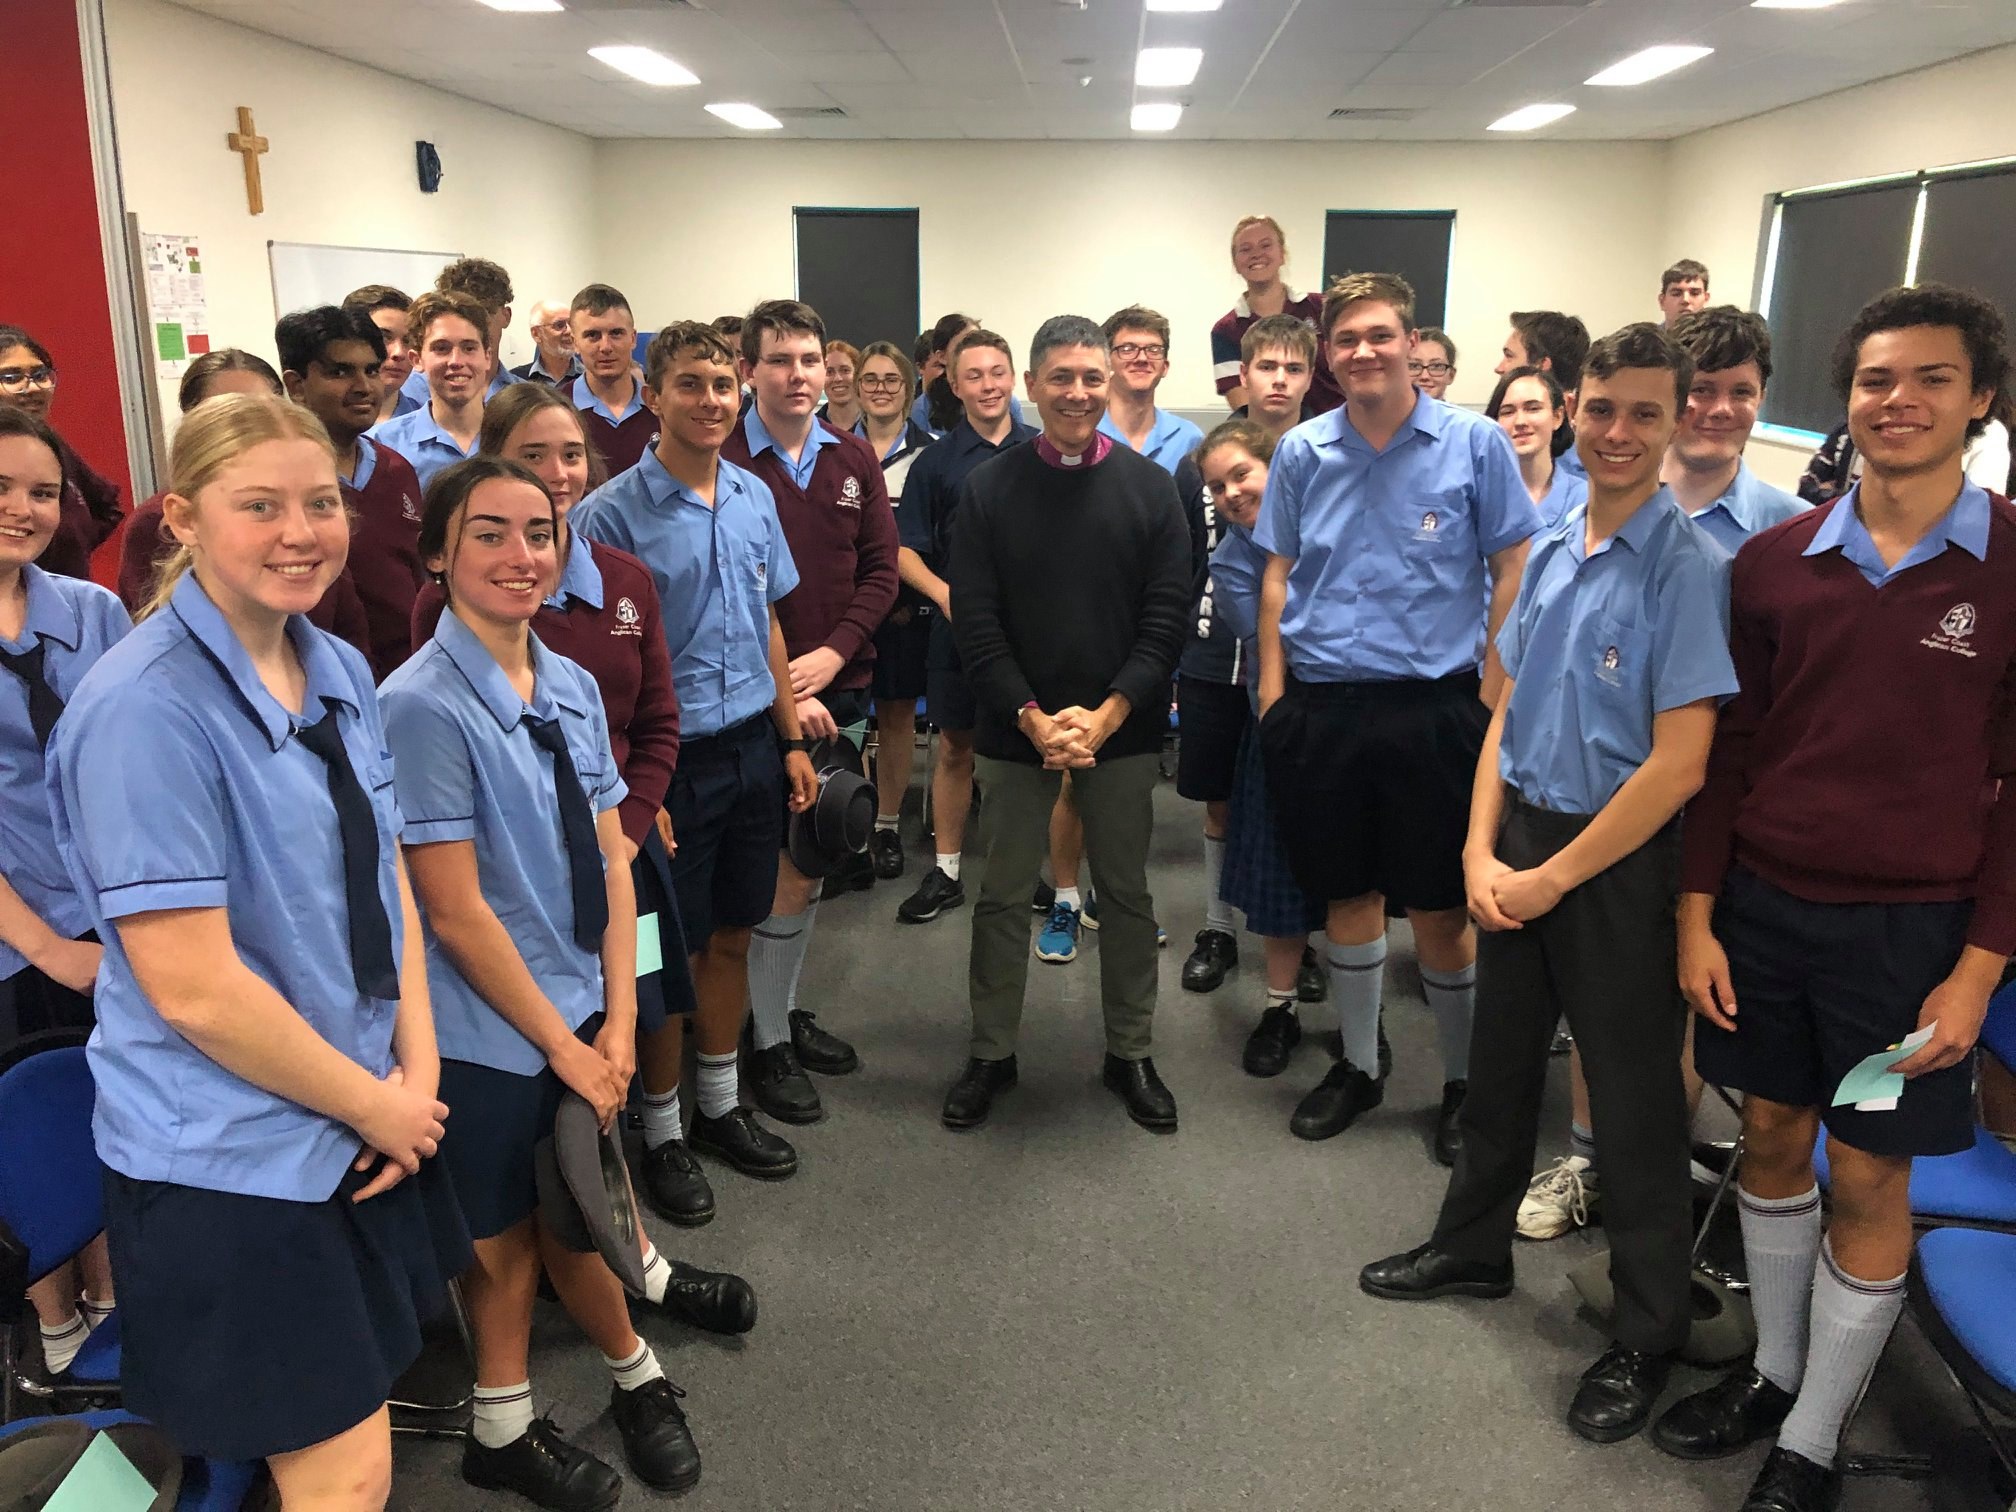 Bishop Jeremy Greaves with senior Fraser Coast Anglican College students after a Q&A